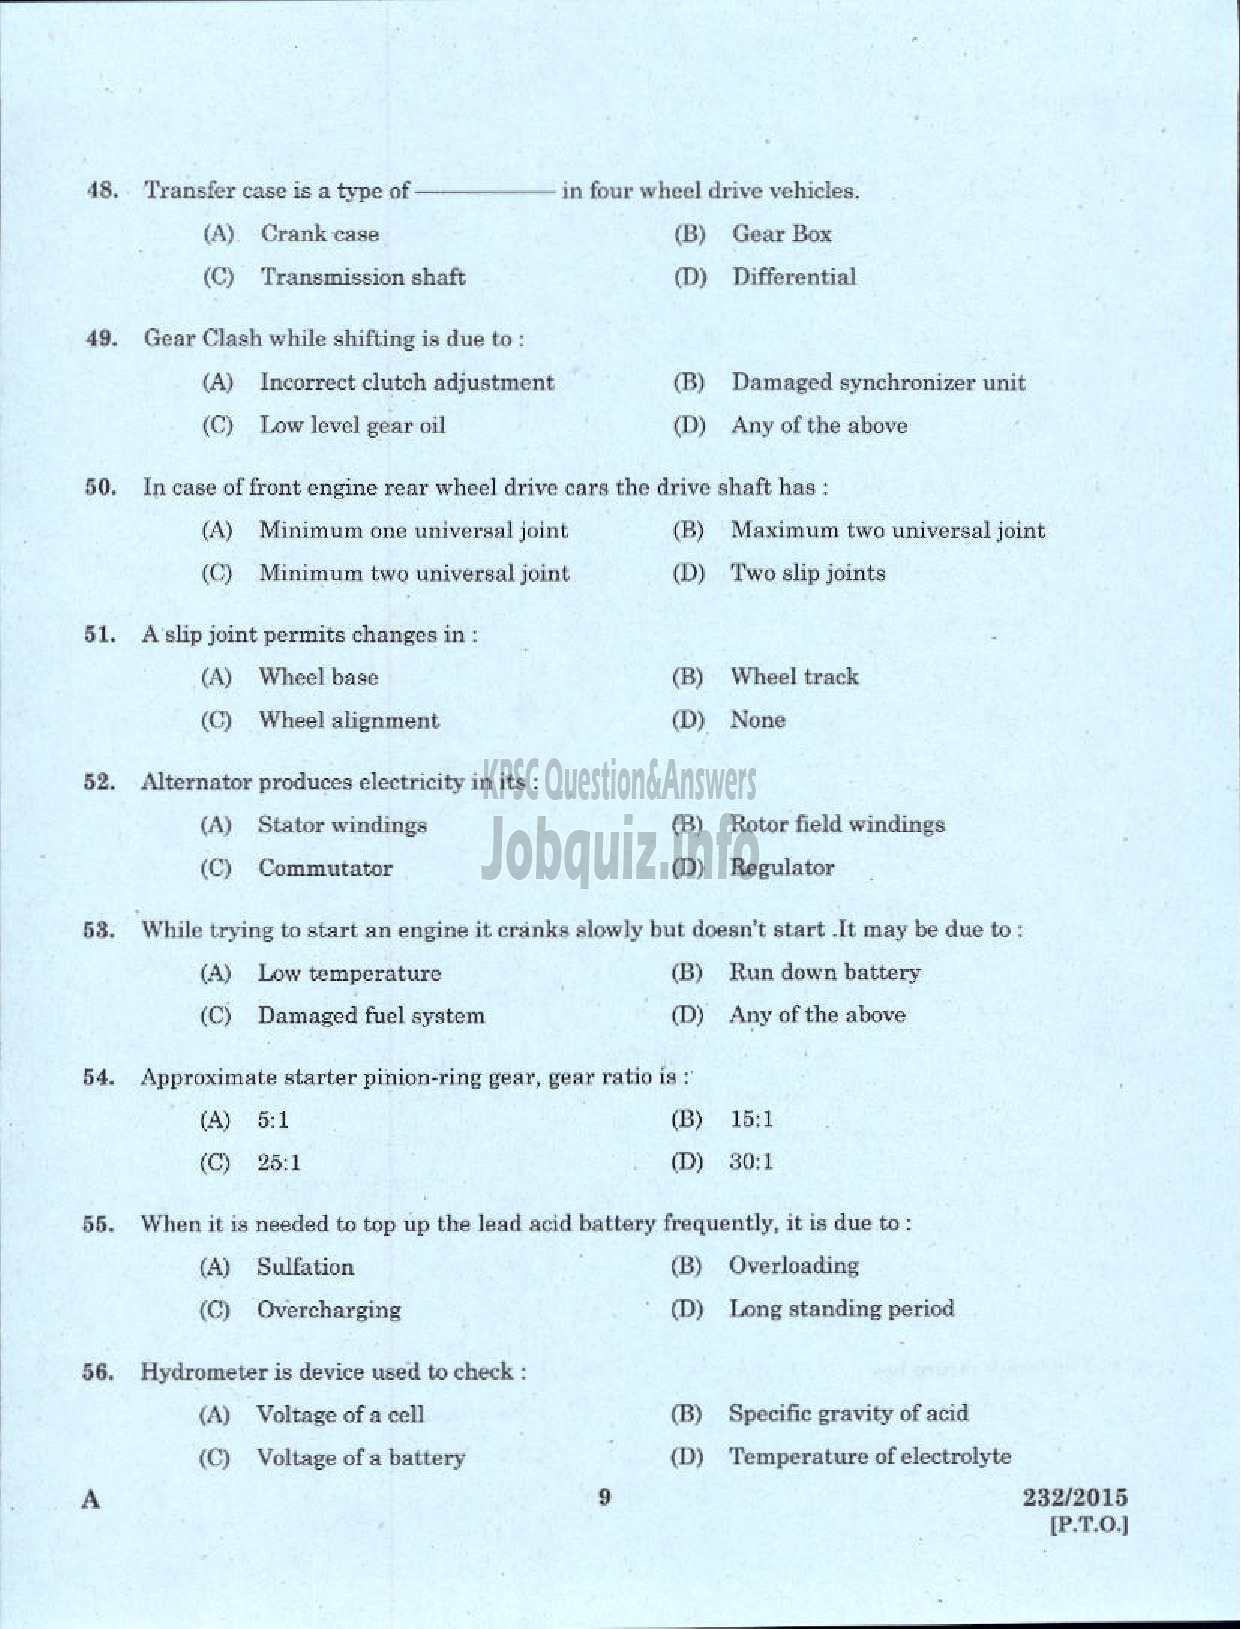 Kerala PSC Question Paper - MOTOR MECHANIC/STORE ASSISTANT GROUND WATER-7